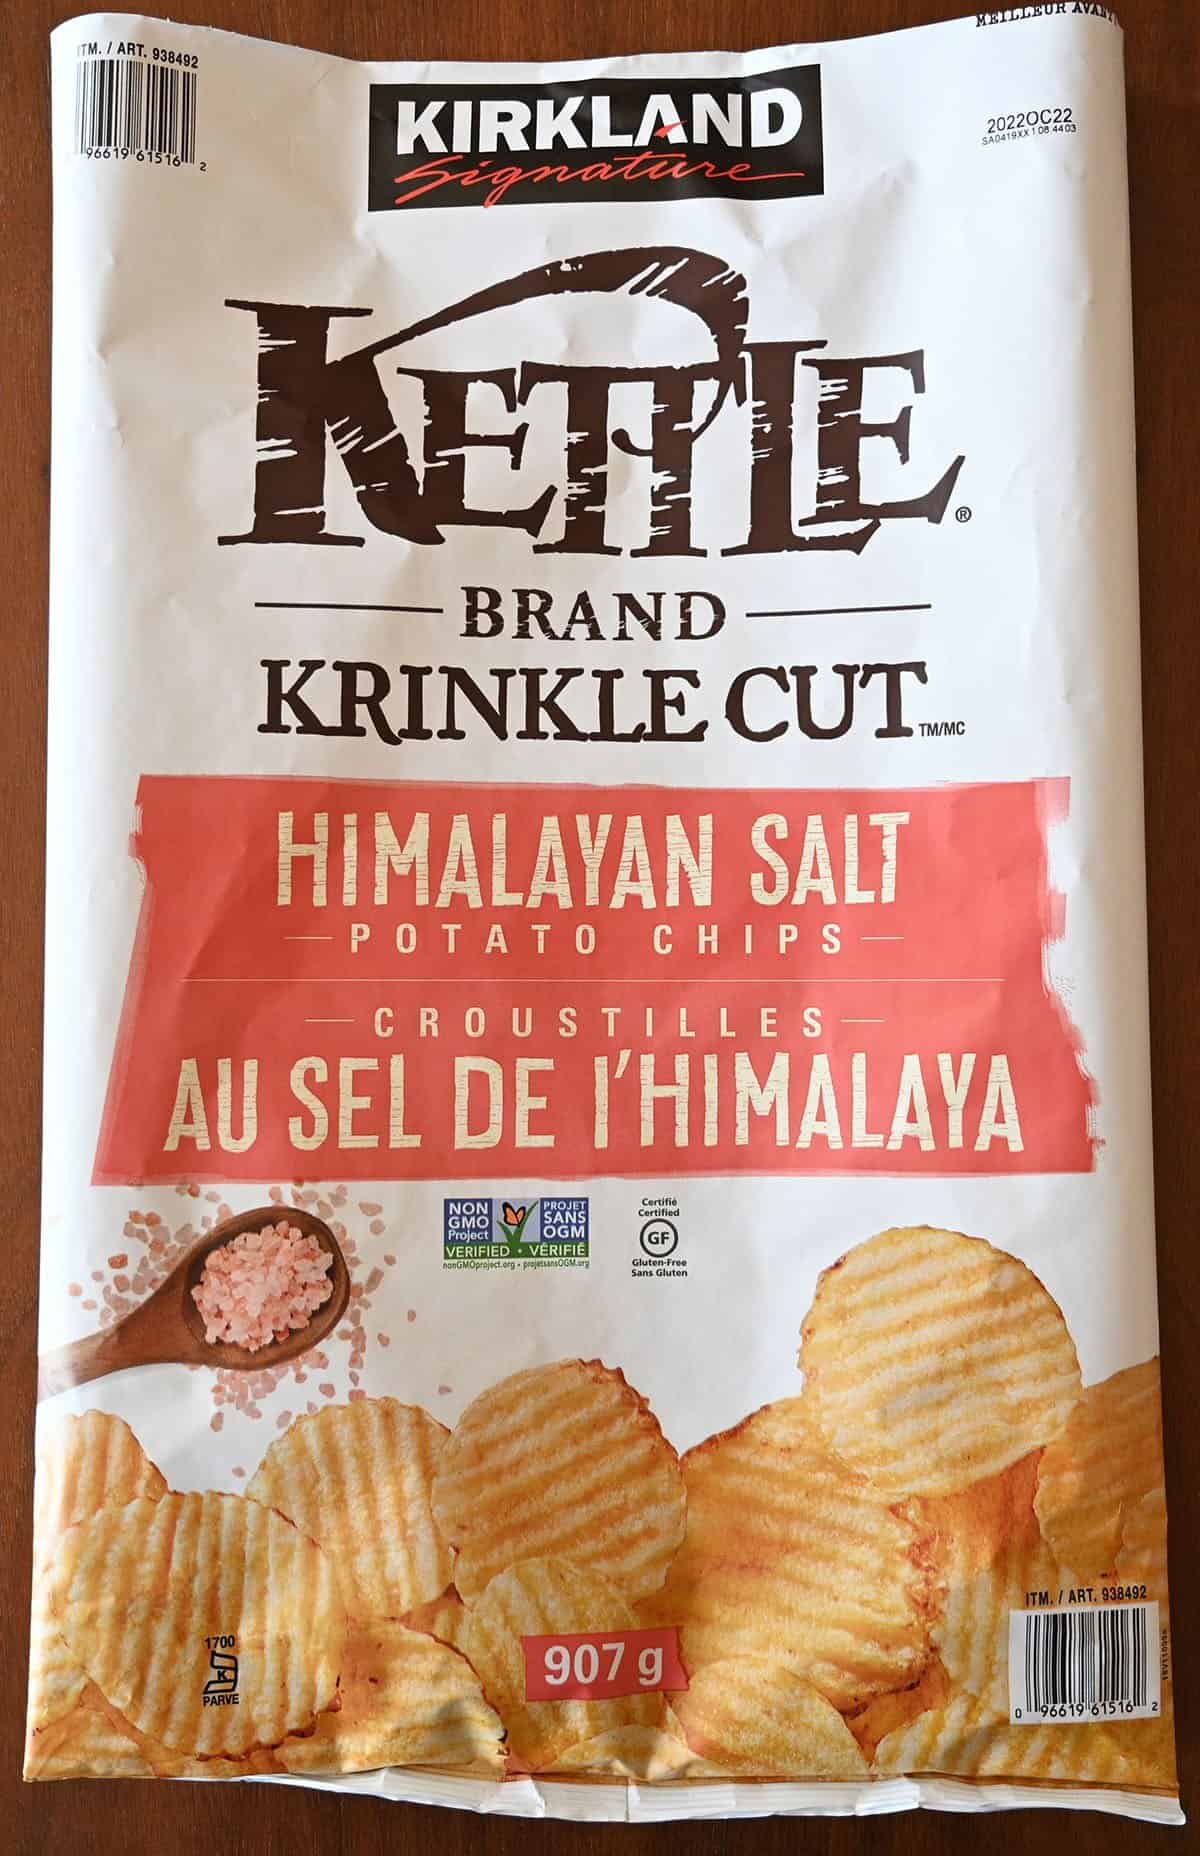 Close up image of the Costco Kirkland Signature Kettle Brand Potato Chips with the chips removed and bag flattened. 